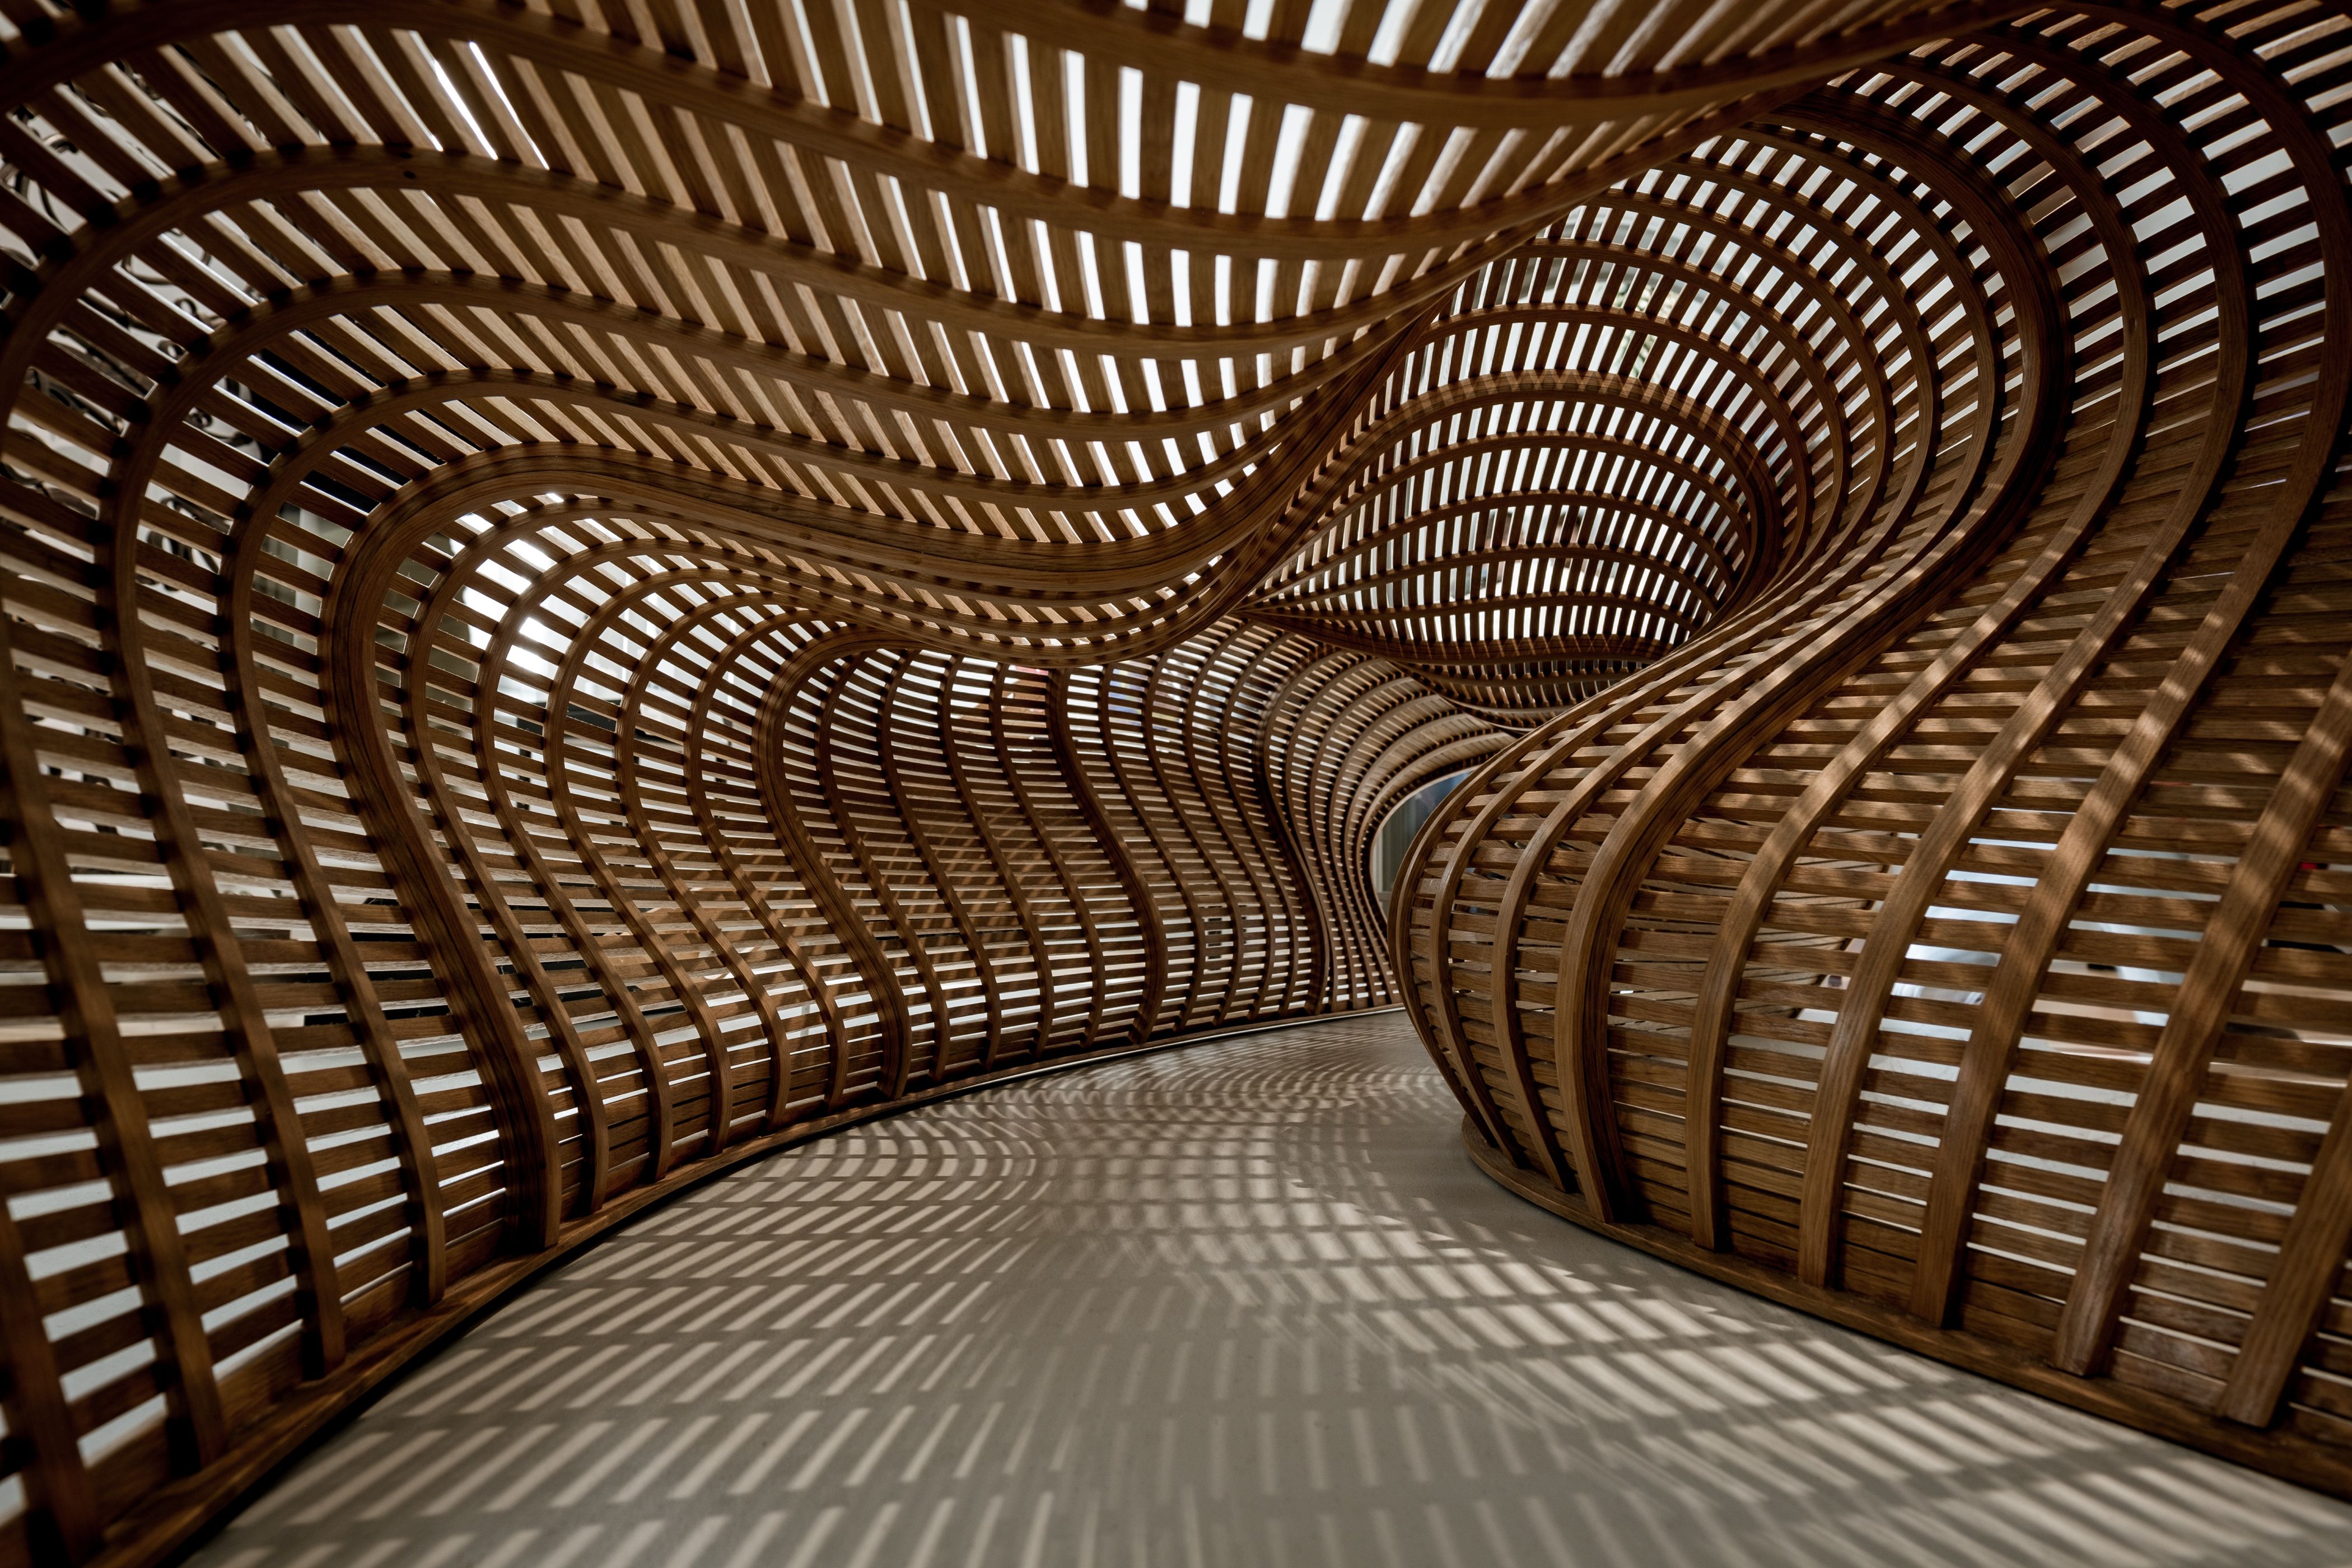 bamboo sculpture creating intensive play of light and shadows